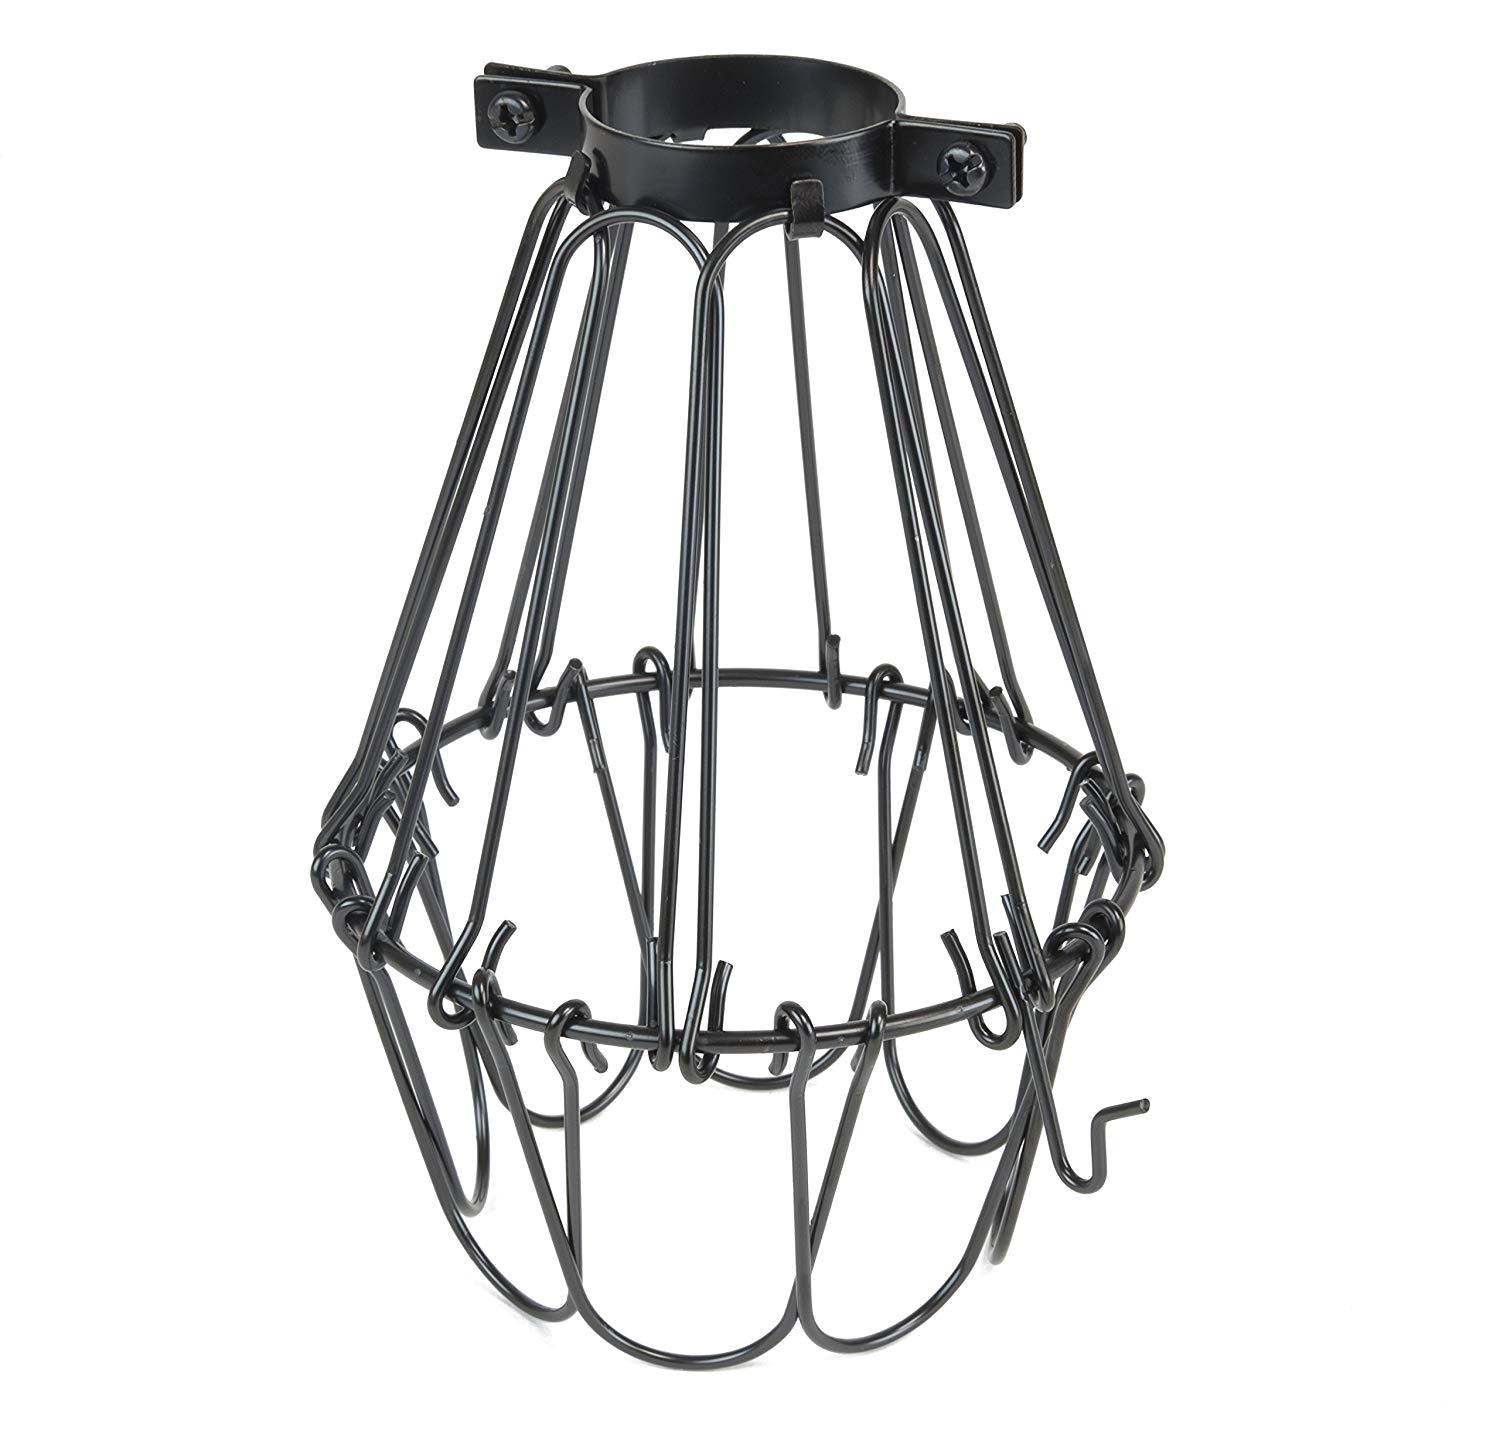 rustic state elegant design metal wire cage by artifact design for diy lighting fixtures and wall pendant lamps with adjustable cage openings in black